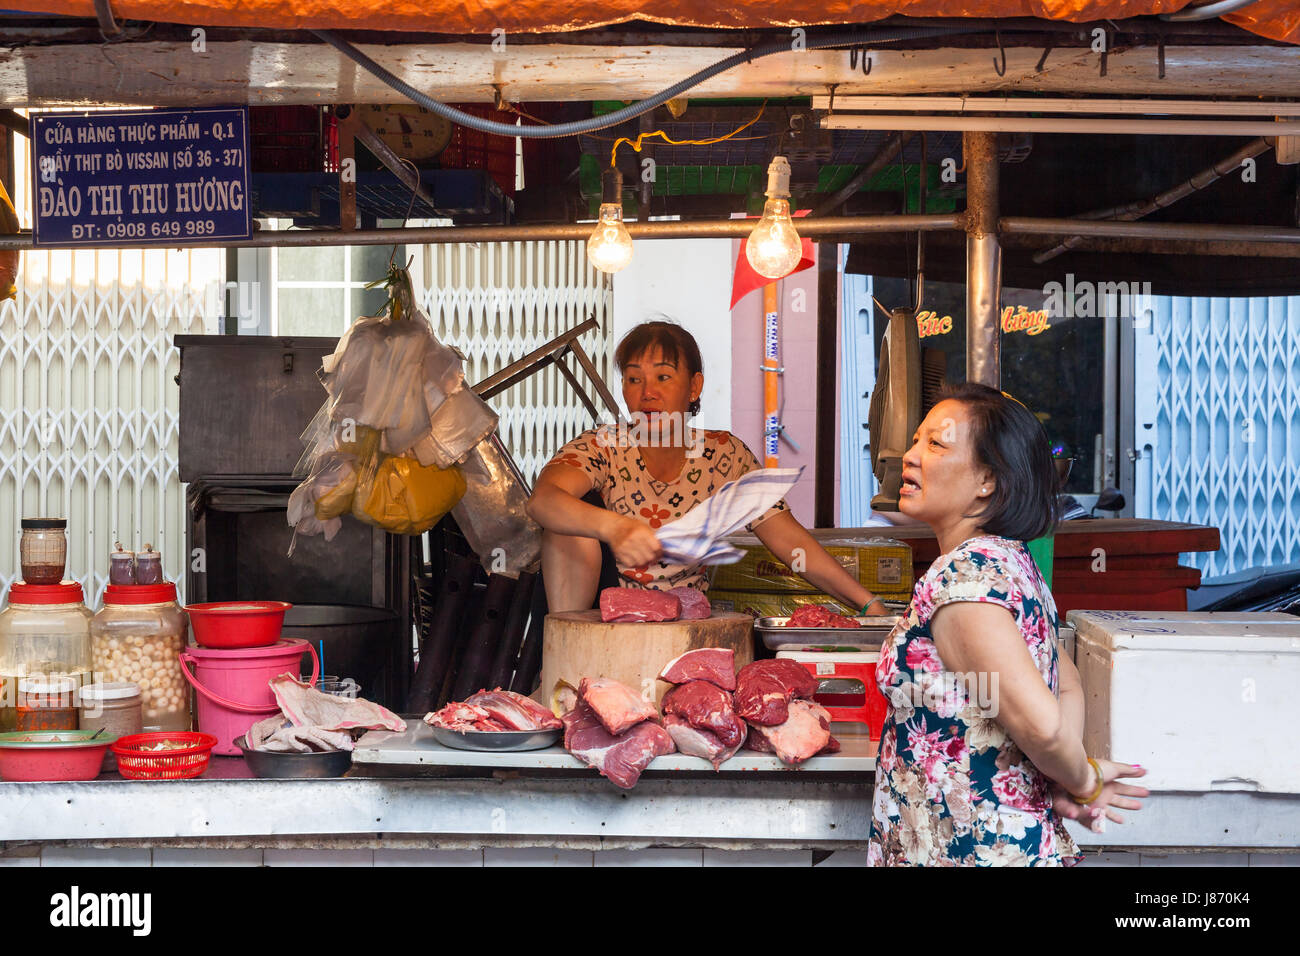 HO CHI MINH CITY, VIETNAM - FEBRUARY 07: Women are selling meat at the wet market on February 07, 2016 in Ho Chi Minh City, Vietnam. Stock Photo